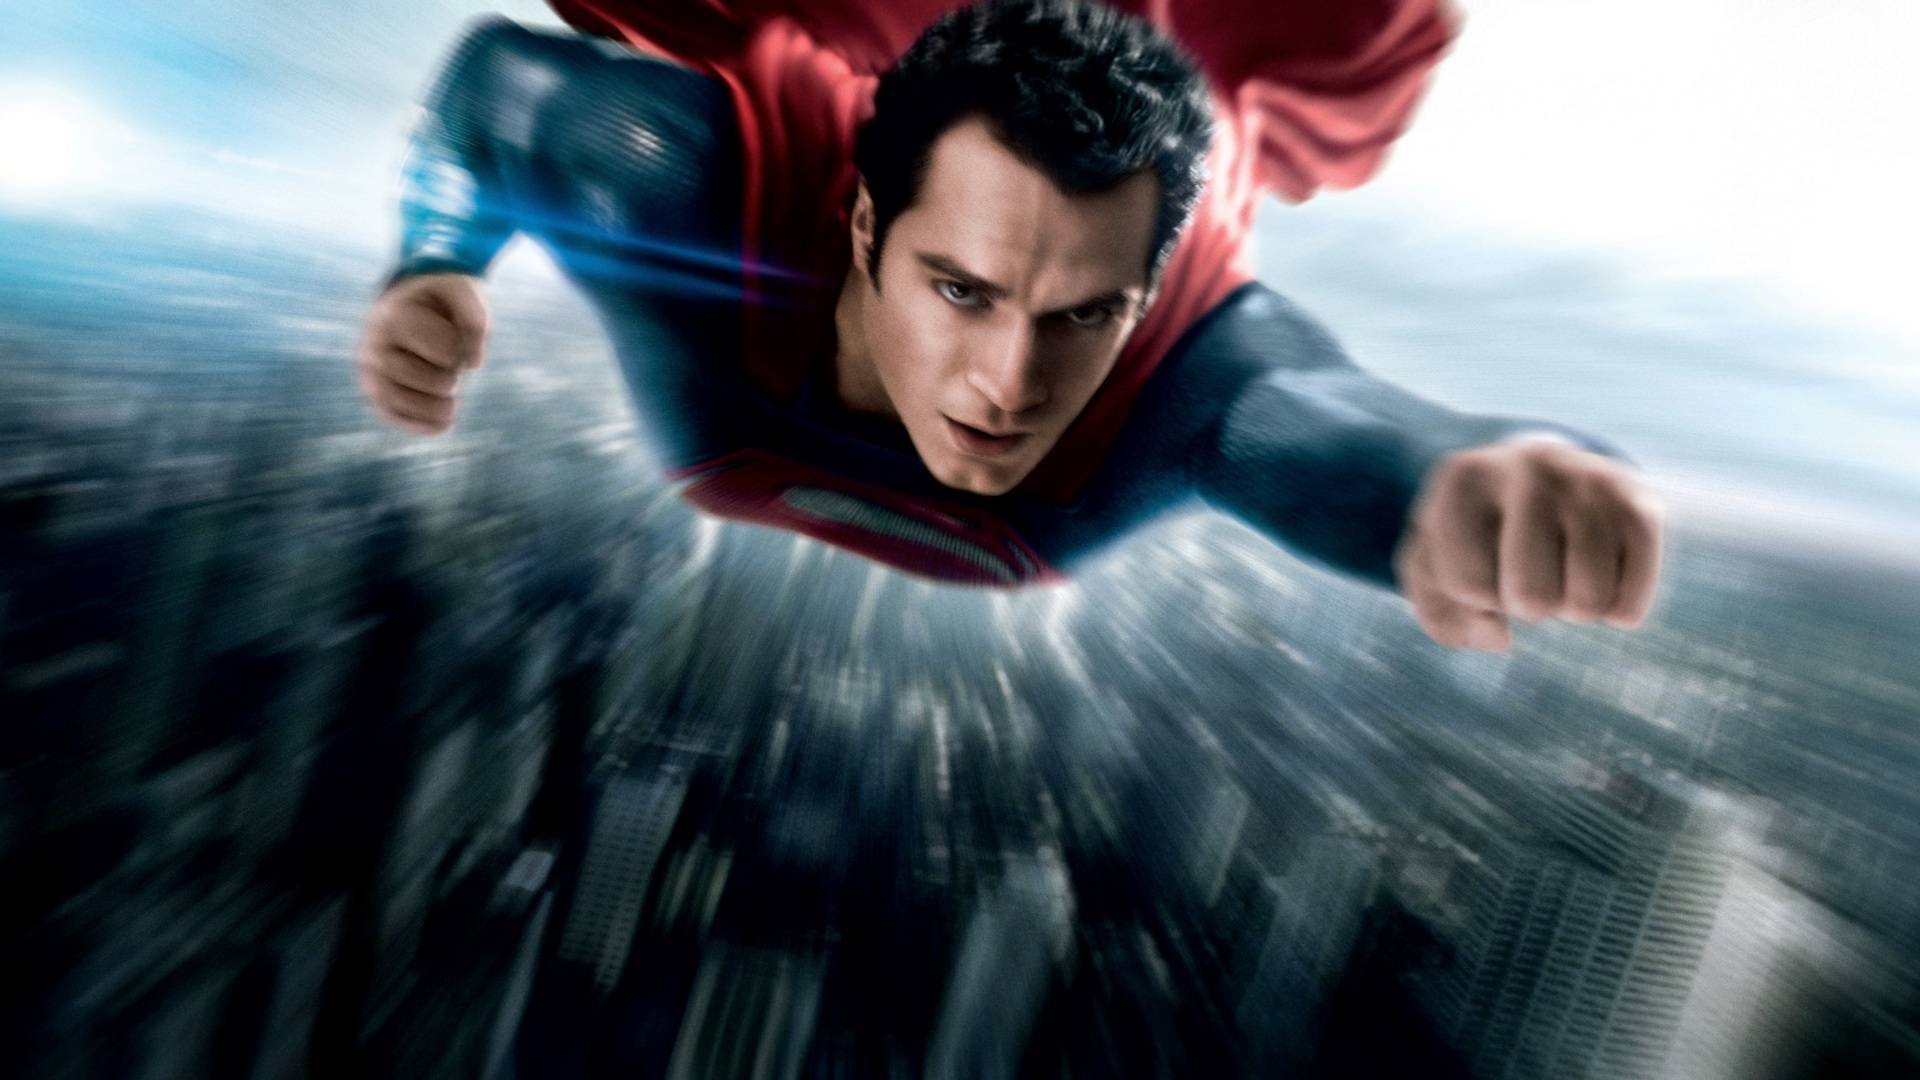 of Man Of Steel HD Quality for PC & Mac, Laptop, Tablet, Mobile Phone